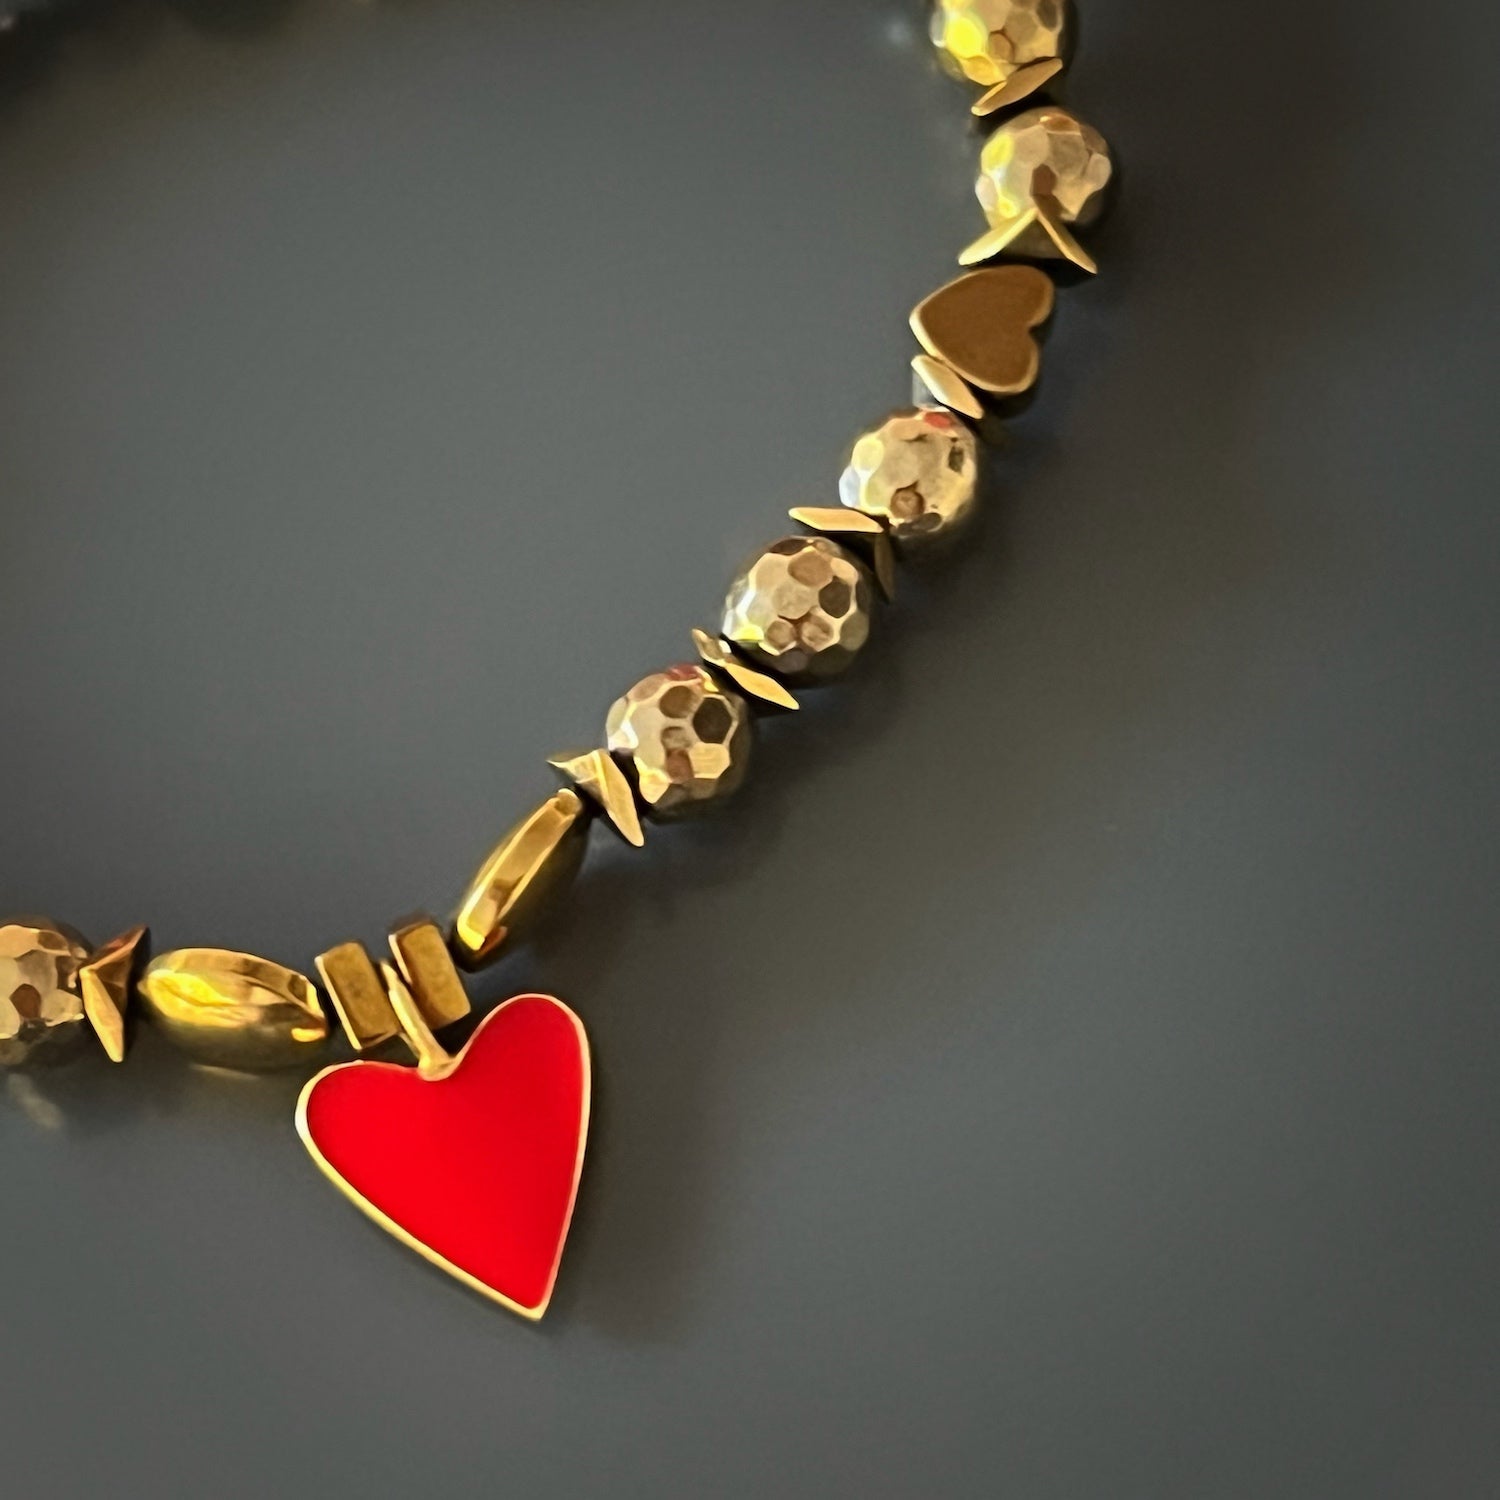 The Red Heart Love Bracelet combines elegance and love, with its gold-colored hematite beads and captivating heart charm.